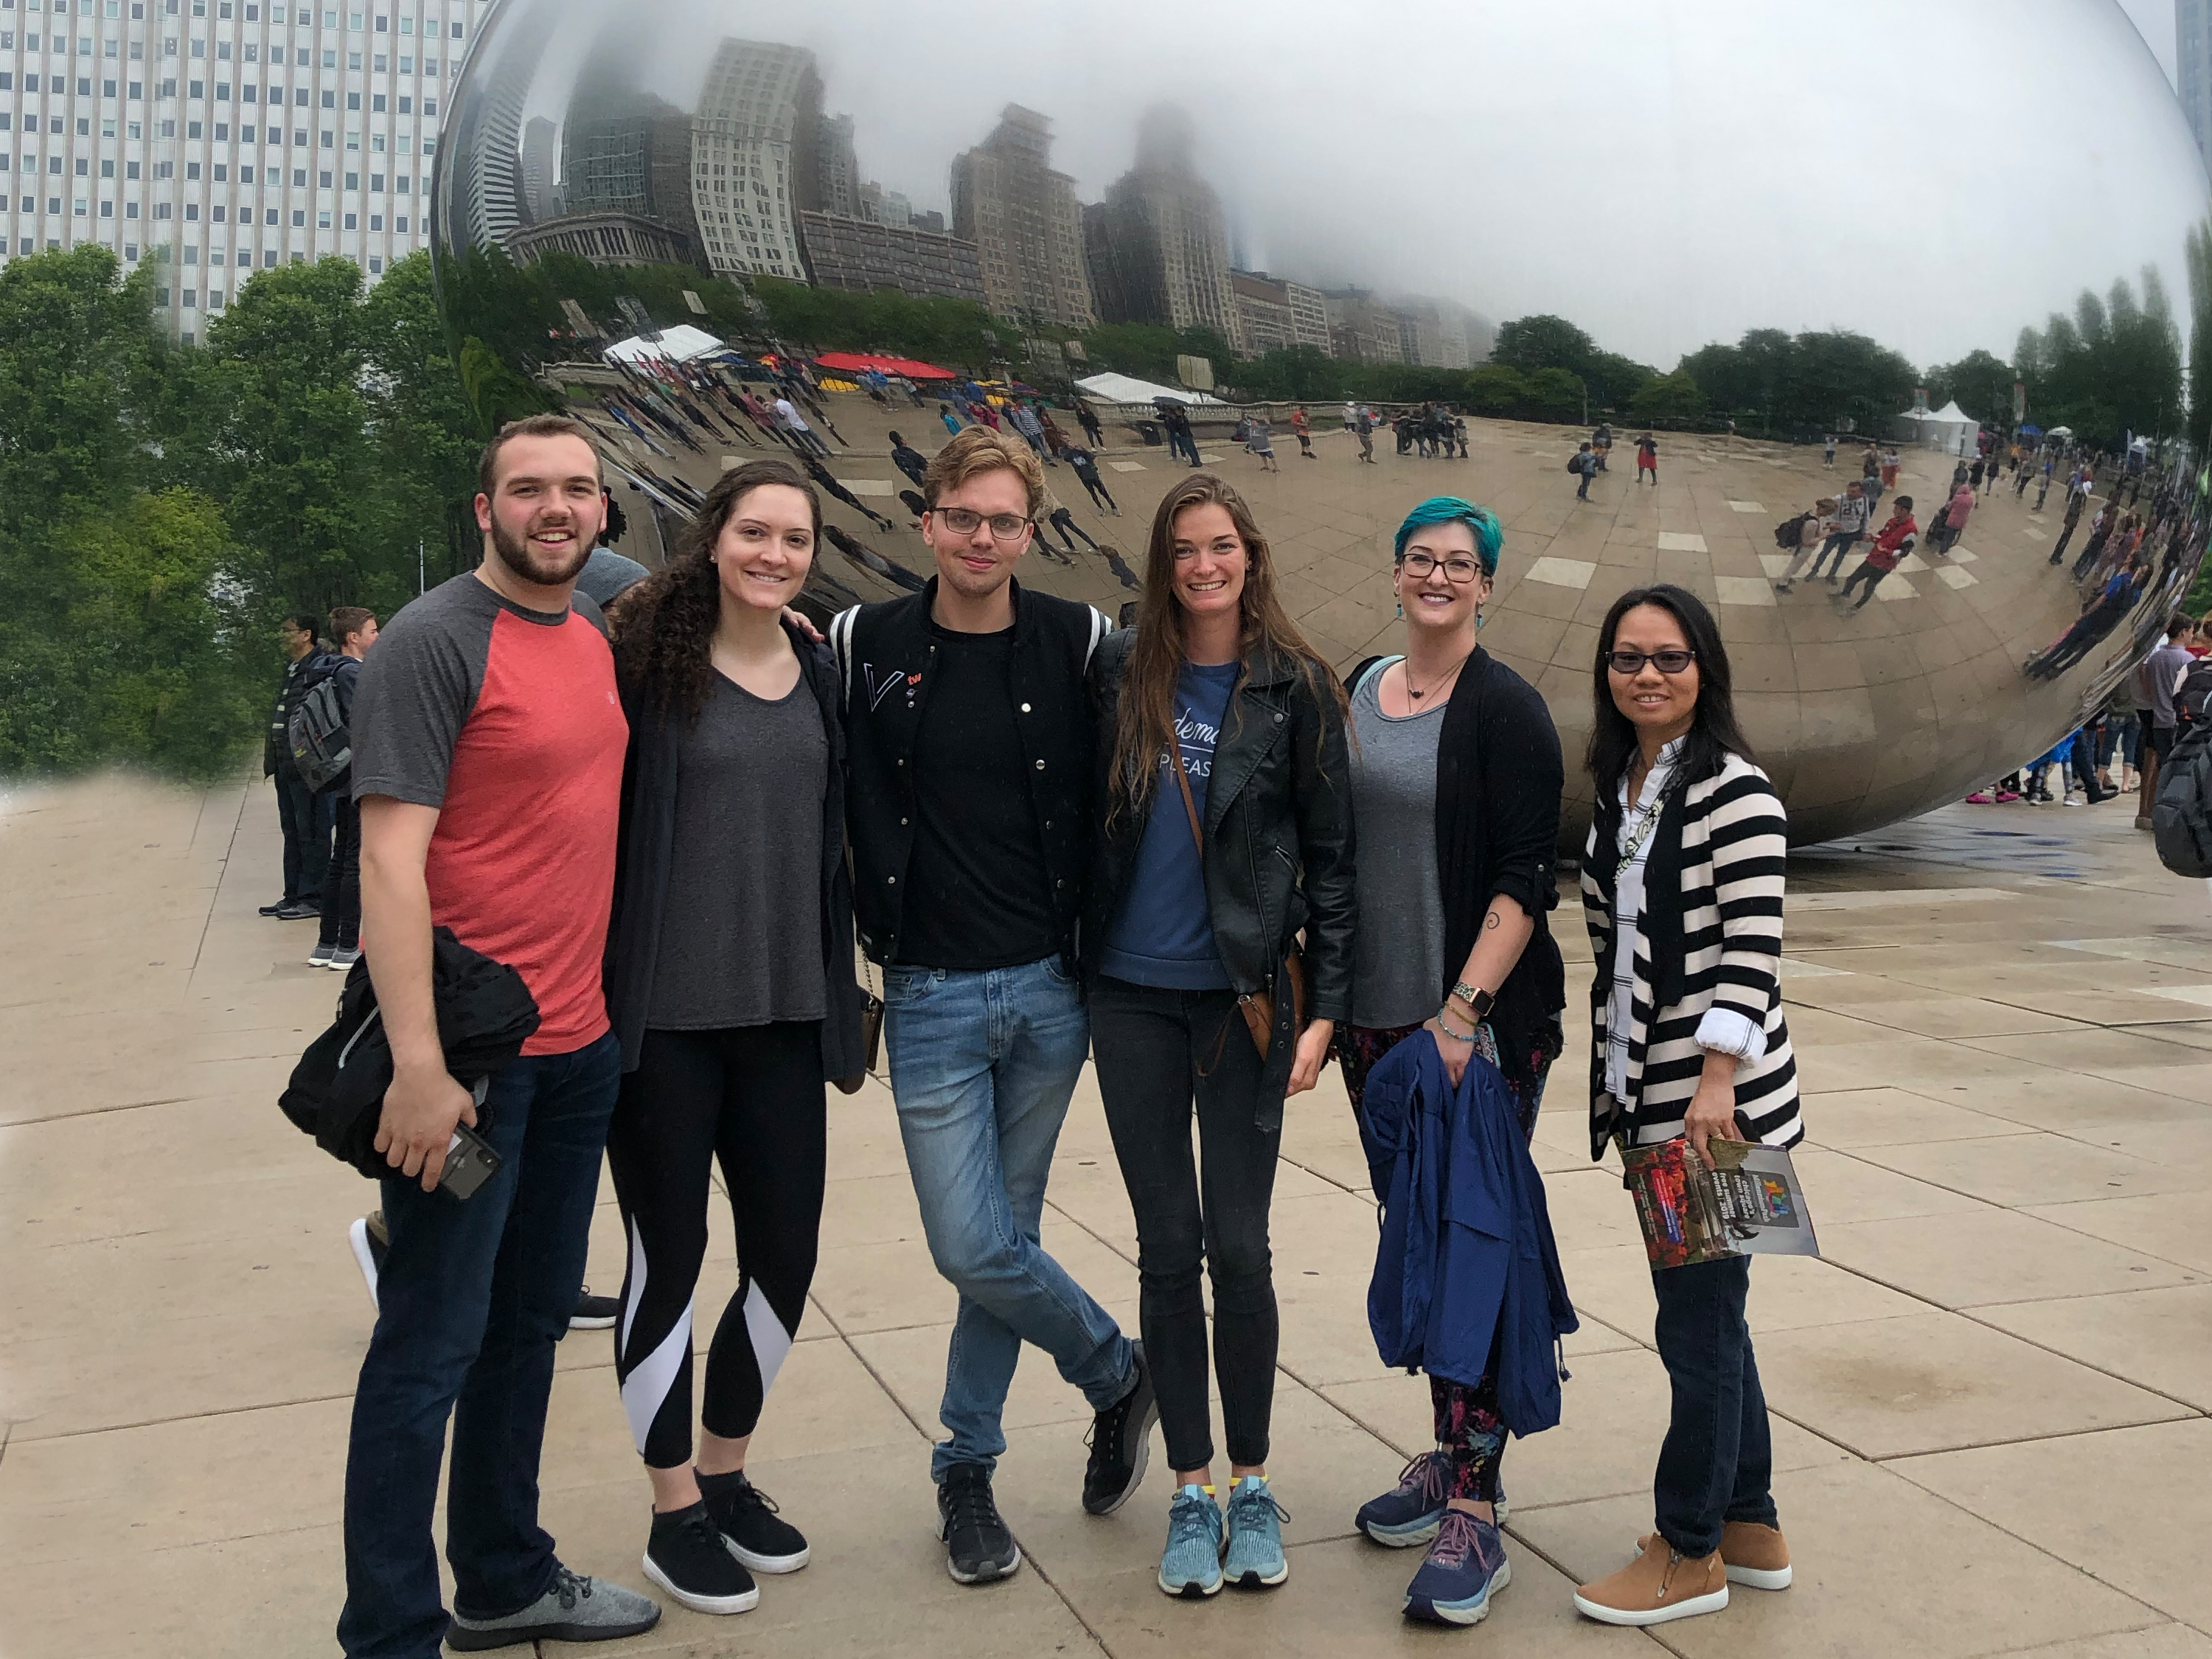 Six Master's of Innovation Design students pose for photo in front of The Bean in Chicago